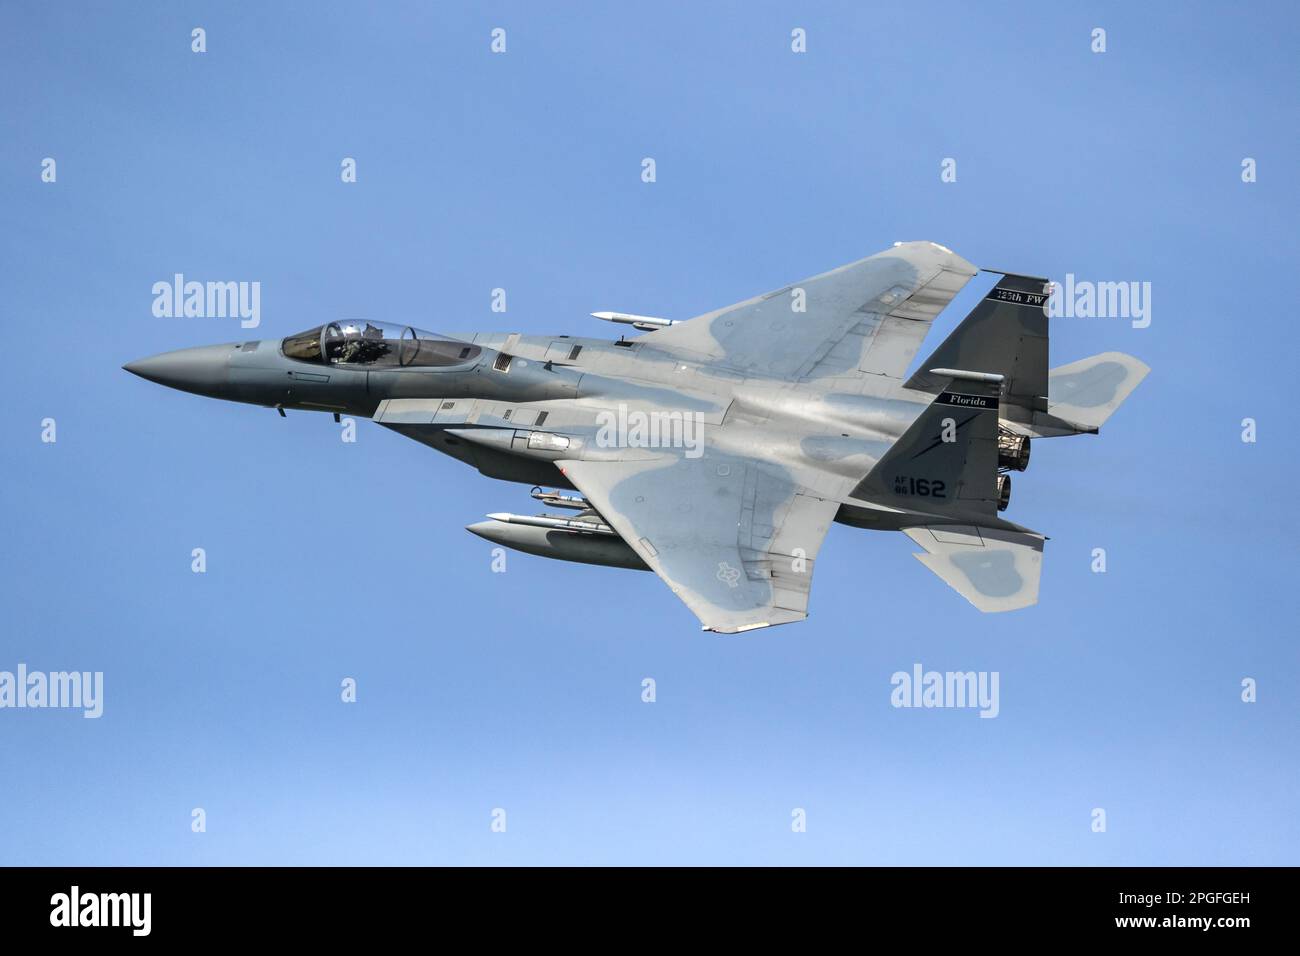 US Air Force F-15 Eagle fighter jet aircraft from Florida ANG in flight during exercise Frisian Flag. Leeuwarden, The Netherlands - April 5, 2017 Stock Photo